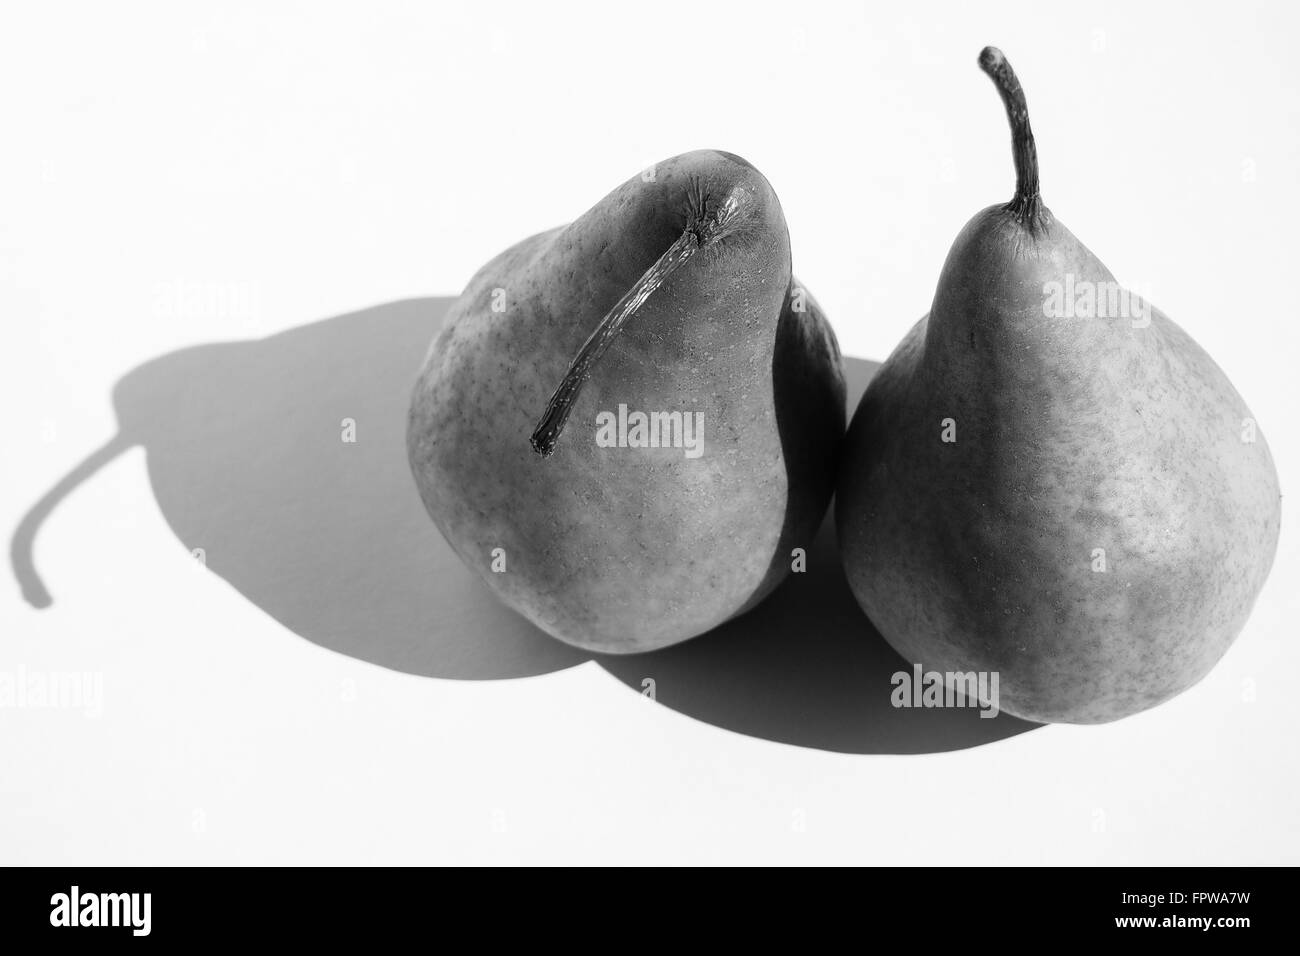 Two Brown Pears in Black and White Stock Photo